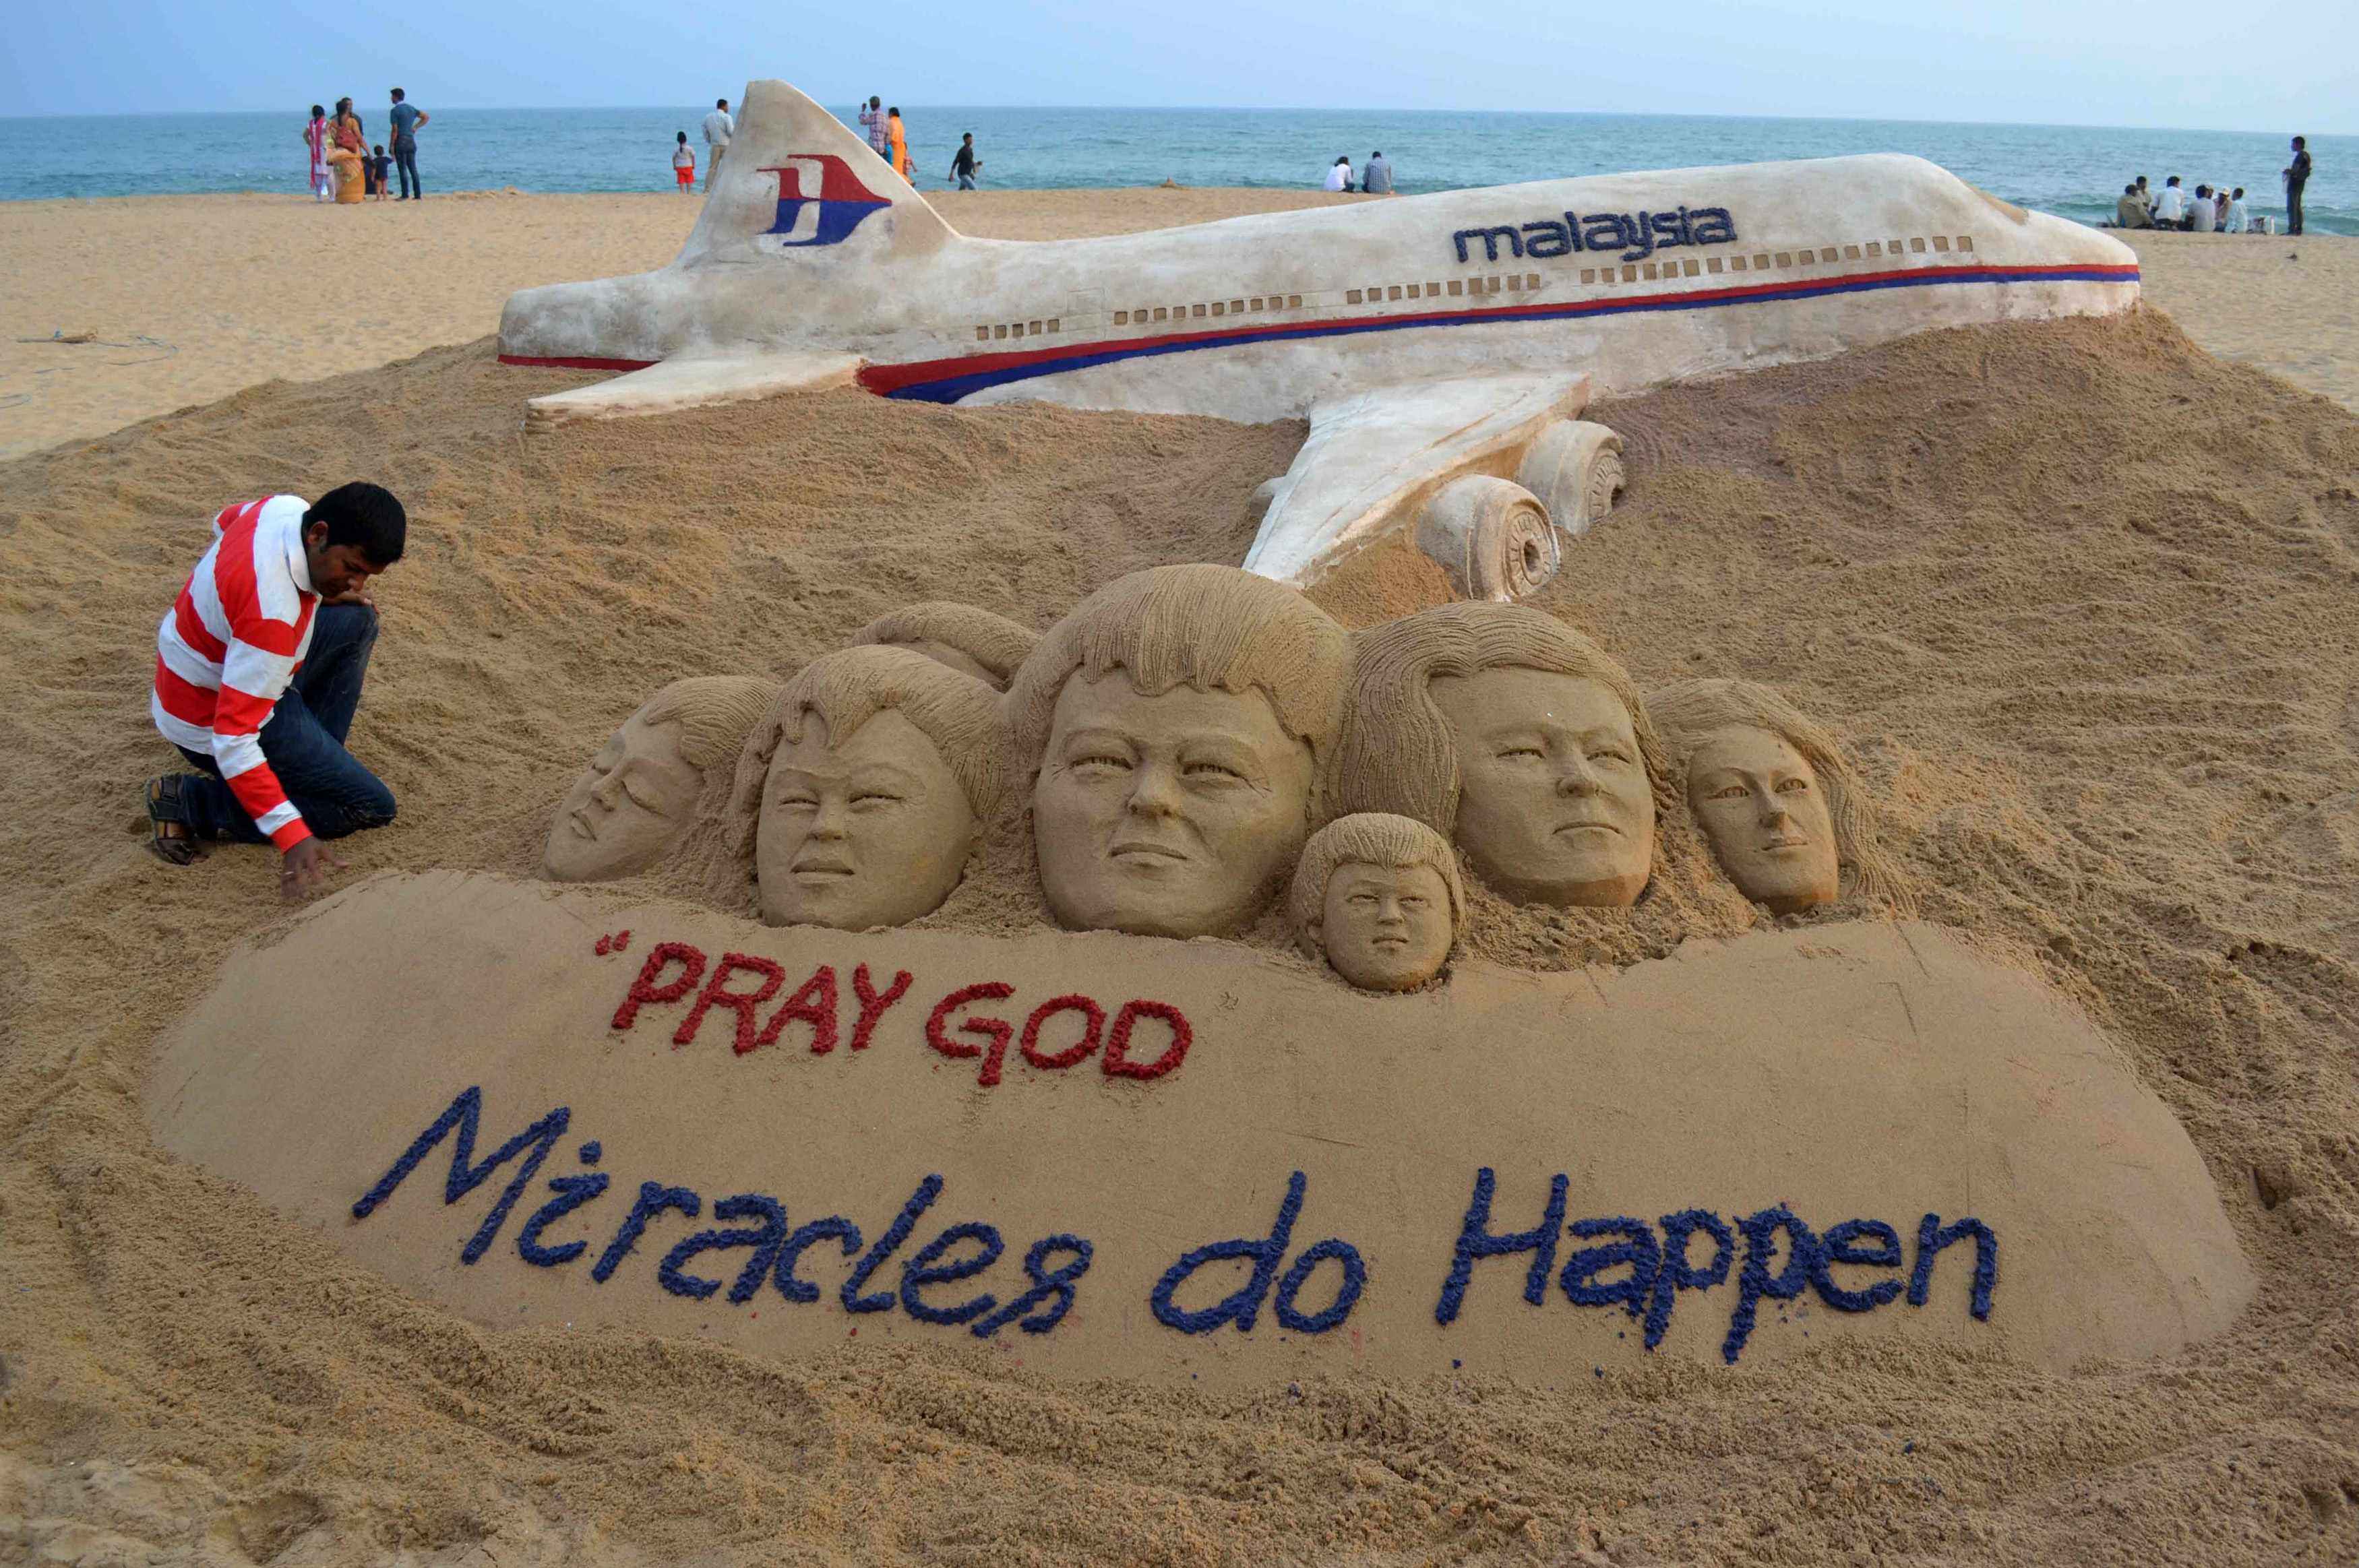 Indian sand artist Sudarshan Patnaik applies the final touches to a sand art sculpture wishing for the well being of the passengers of Malaysian Airlines flight MH370. Photo: Reuters/File